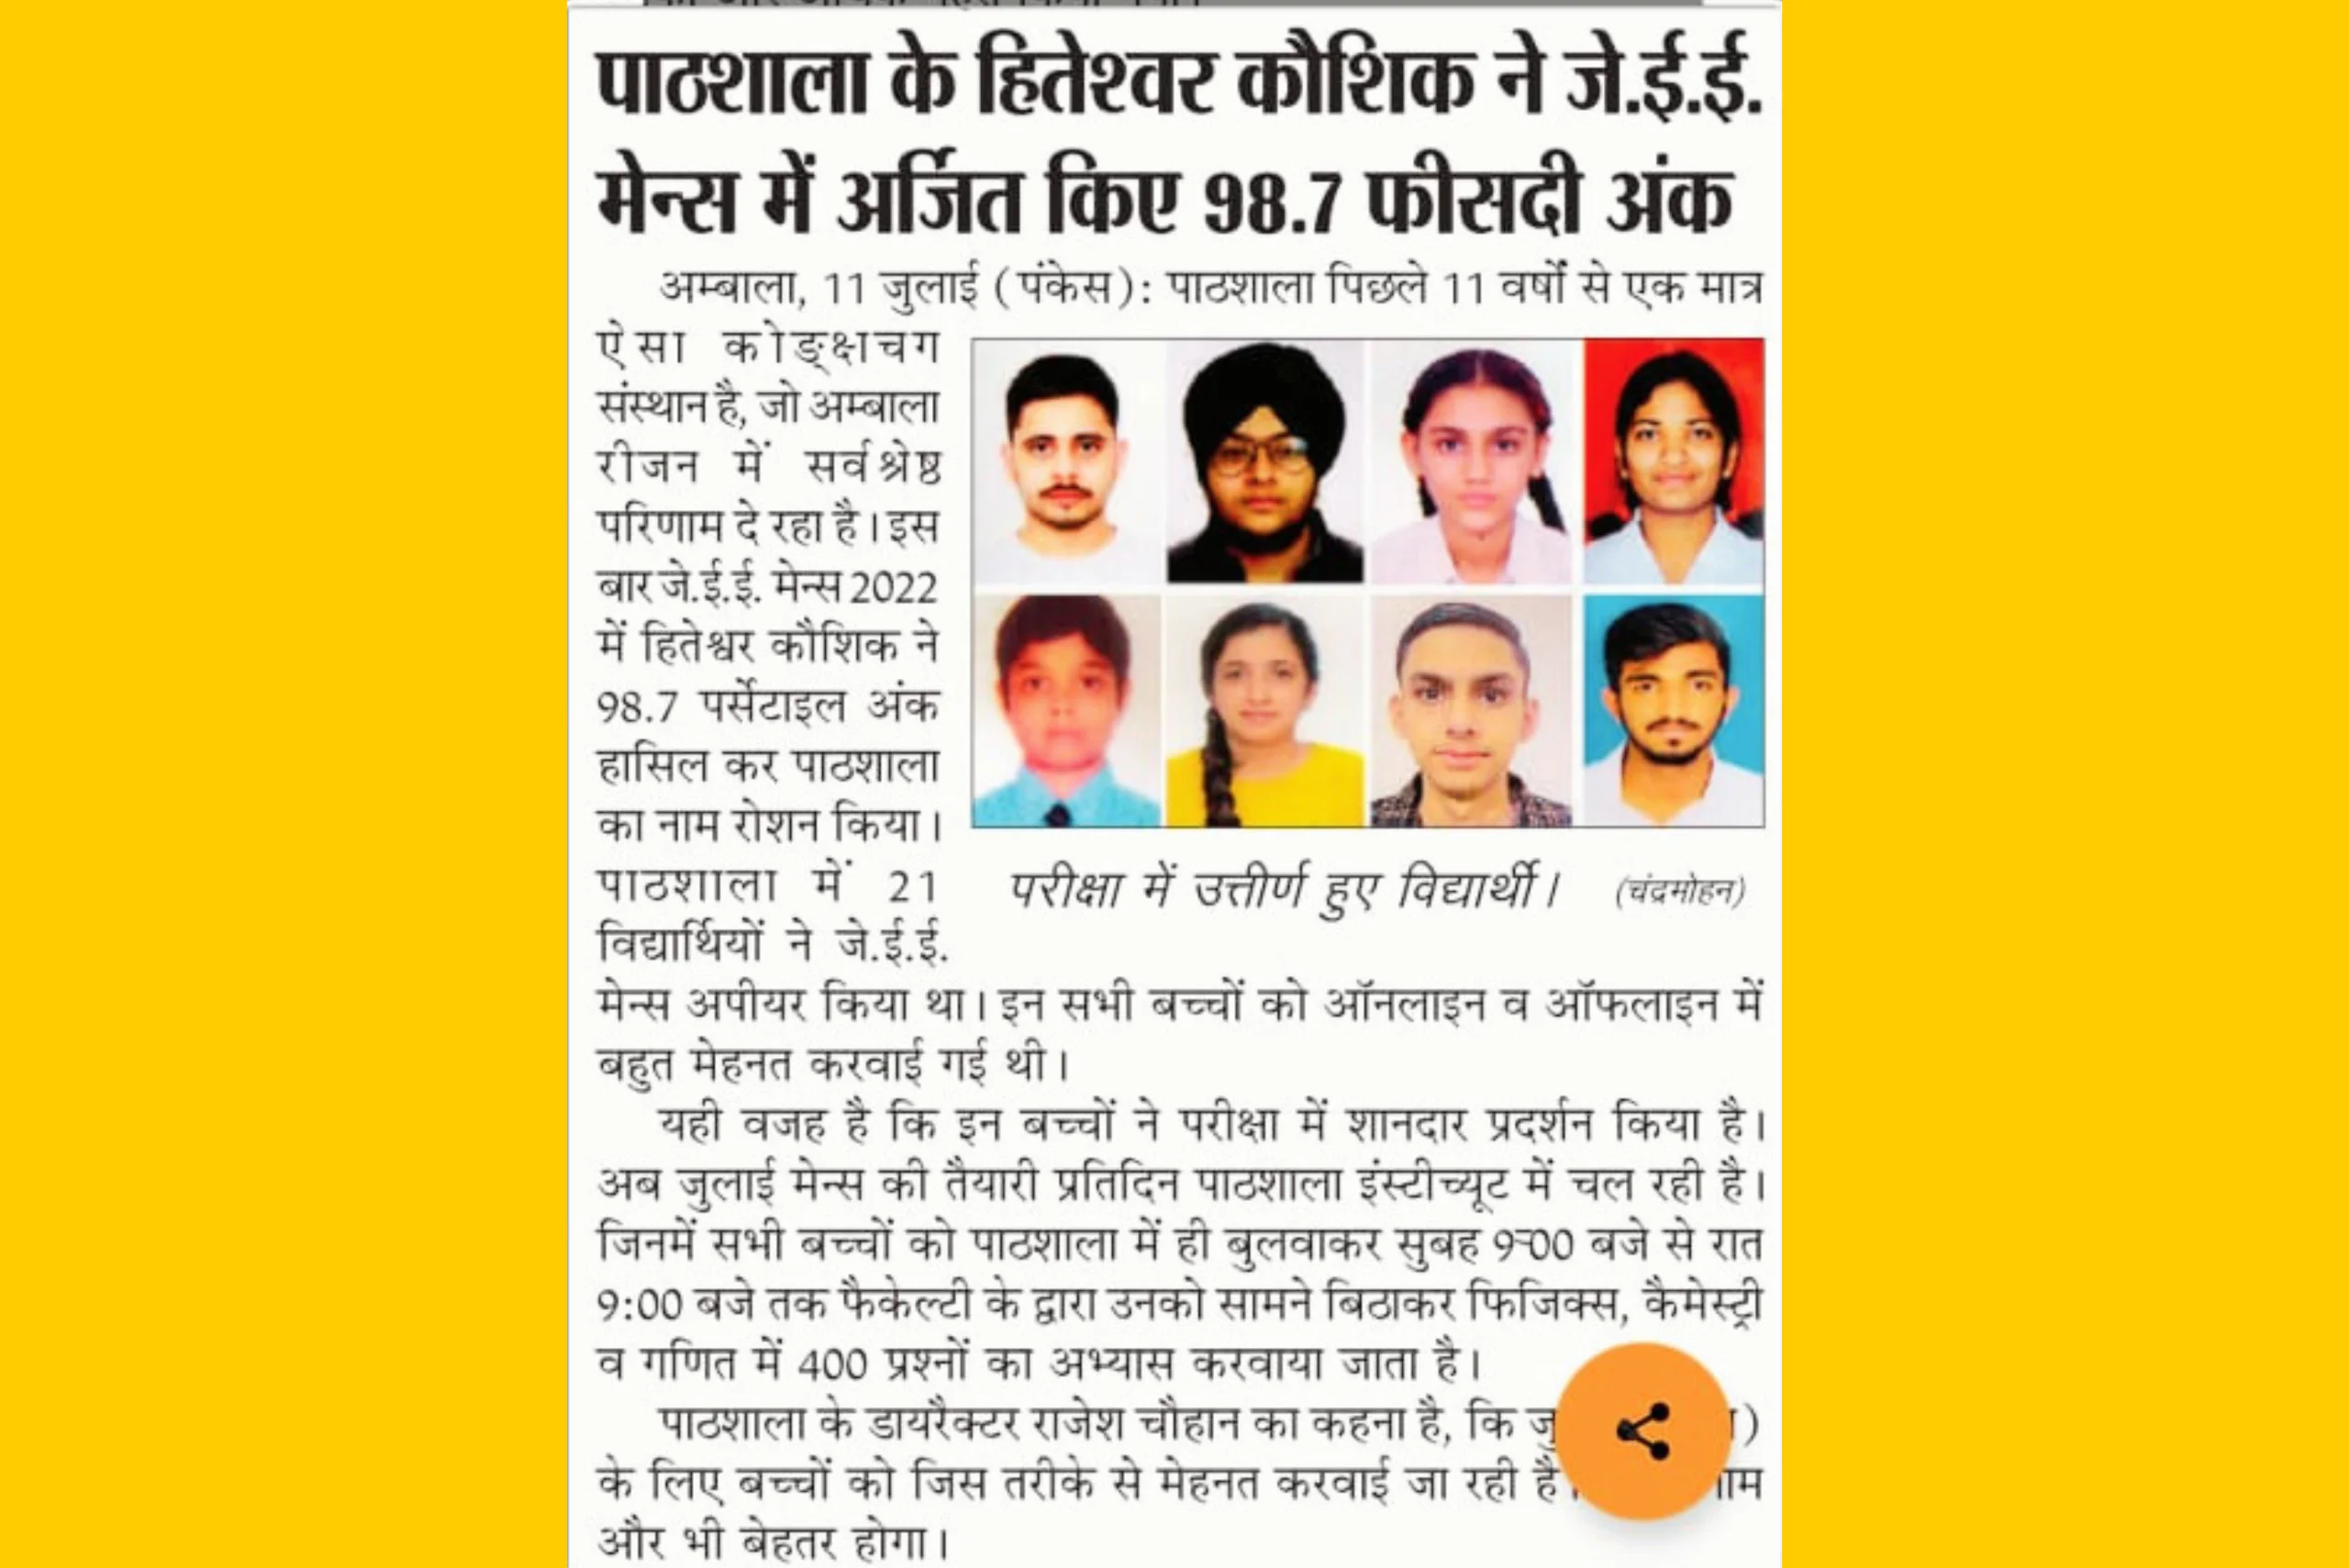 Paathshala Coaching results featured in newspaper 2